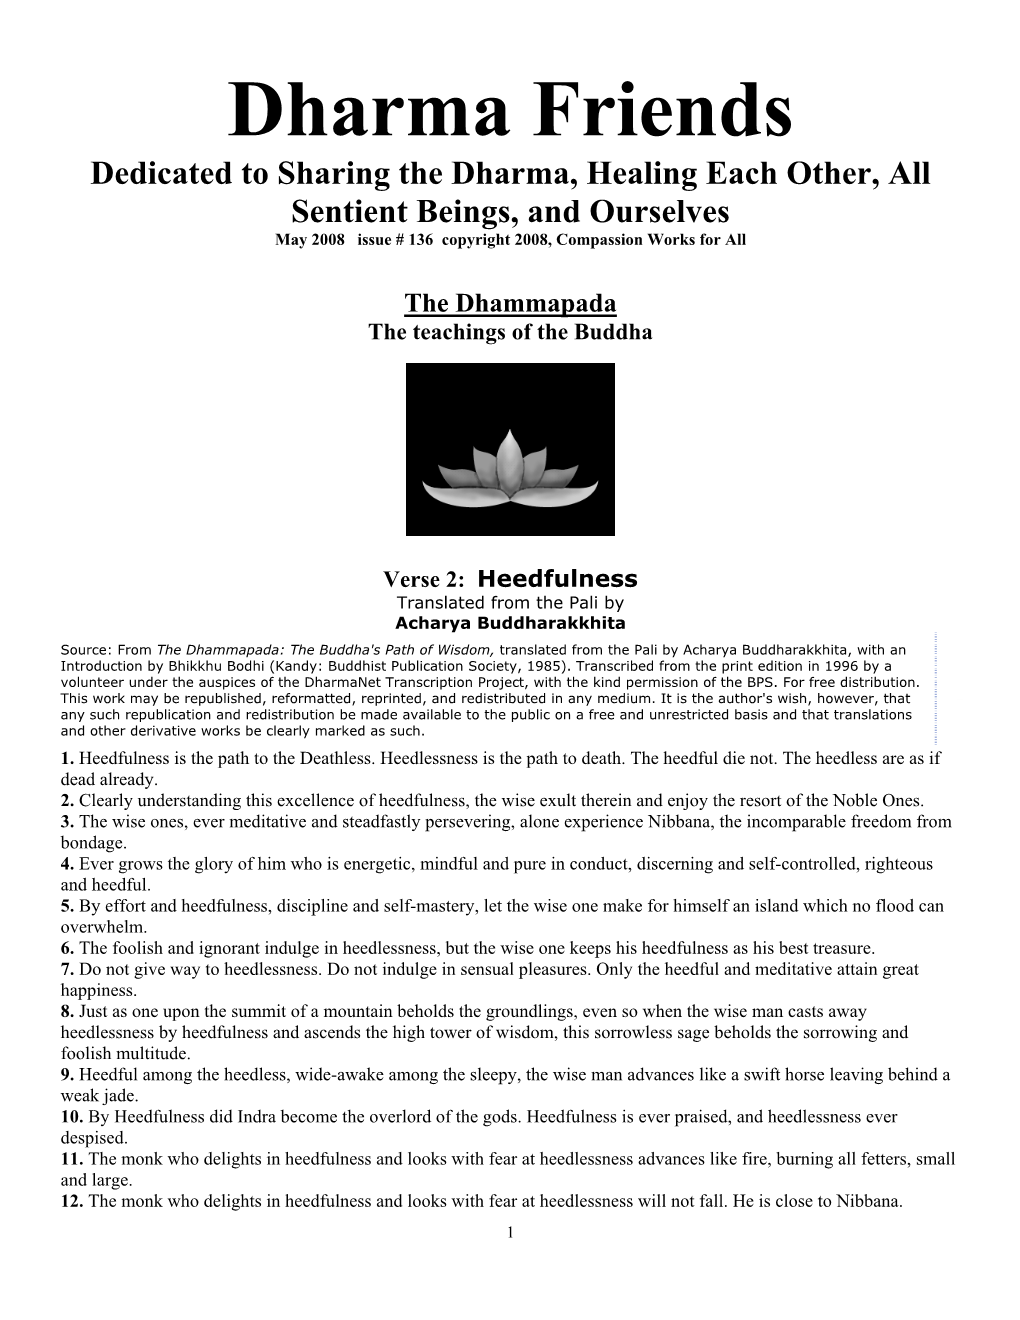 Dharma Friends Dedicated to Sharing the Dharma, Healing Each Other, All Sentient Beings, and Ourselves May 2008 Issue # 136 Copyright 2008, Compassion Works for All